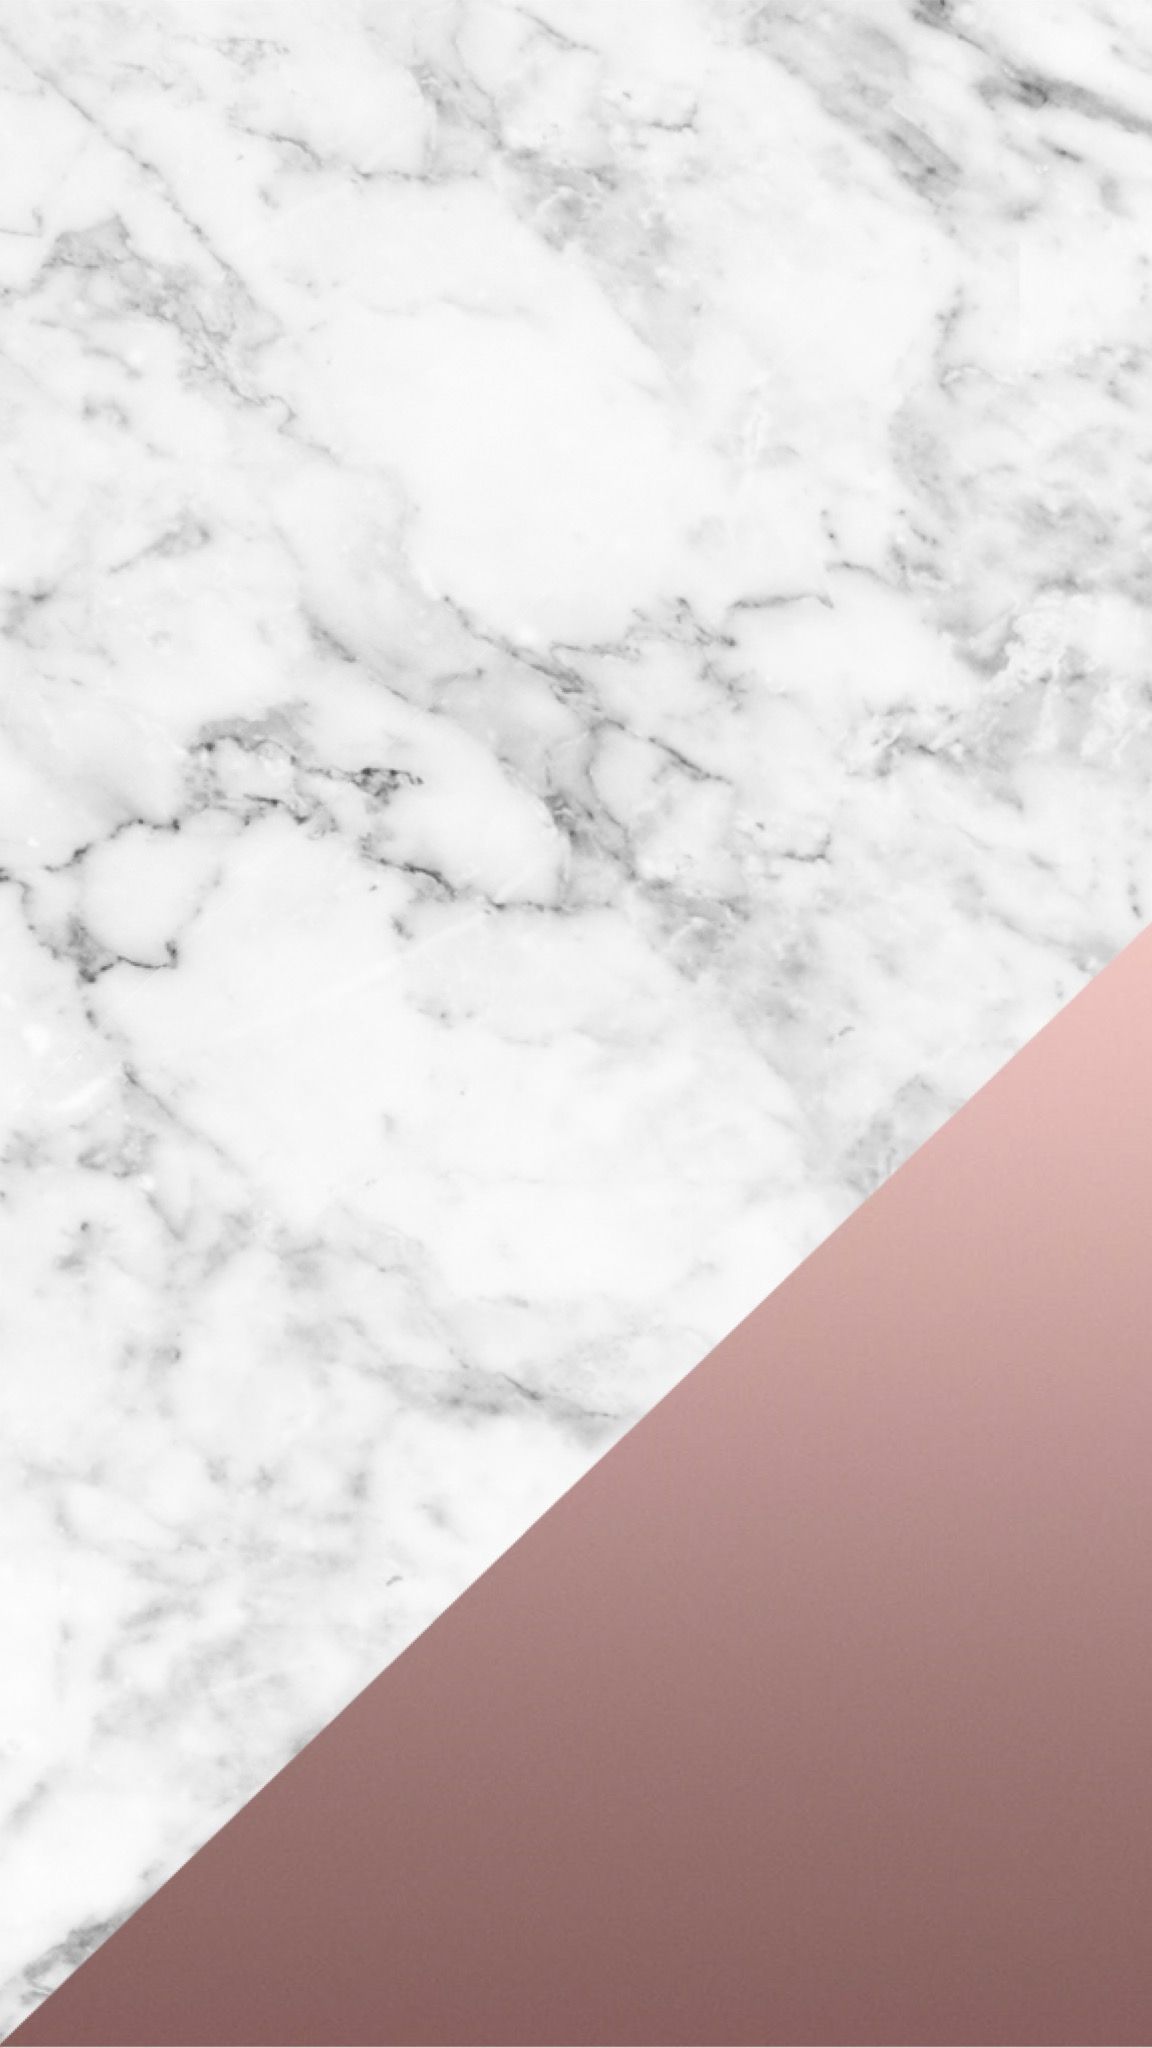 Rose gold marble wallpaper. Marble iphone wallpaper, Marble